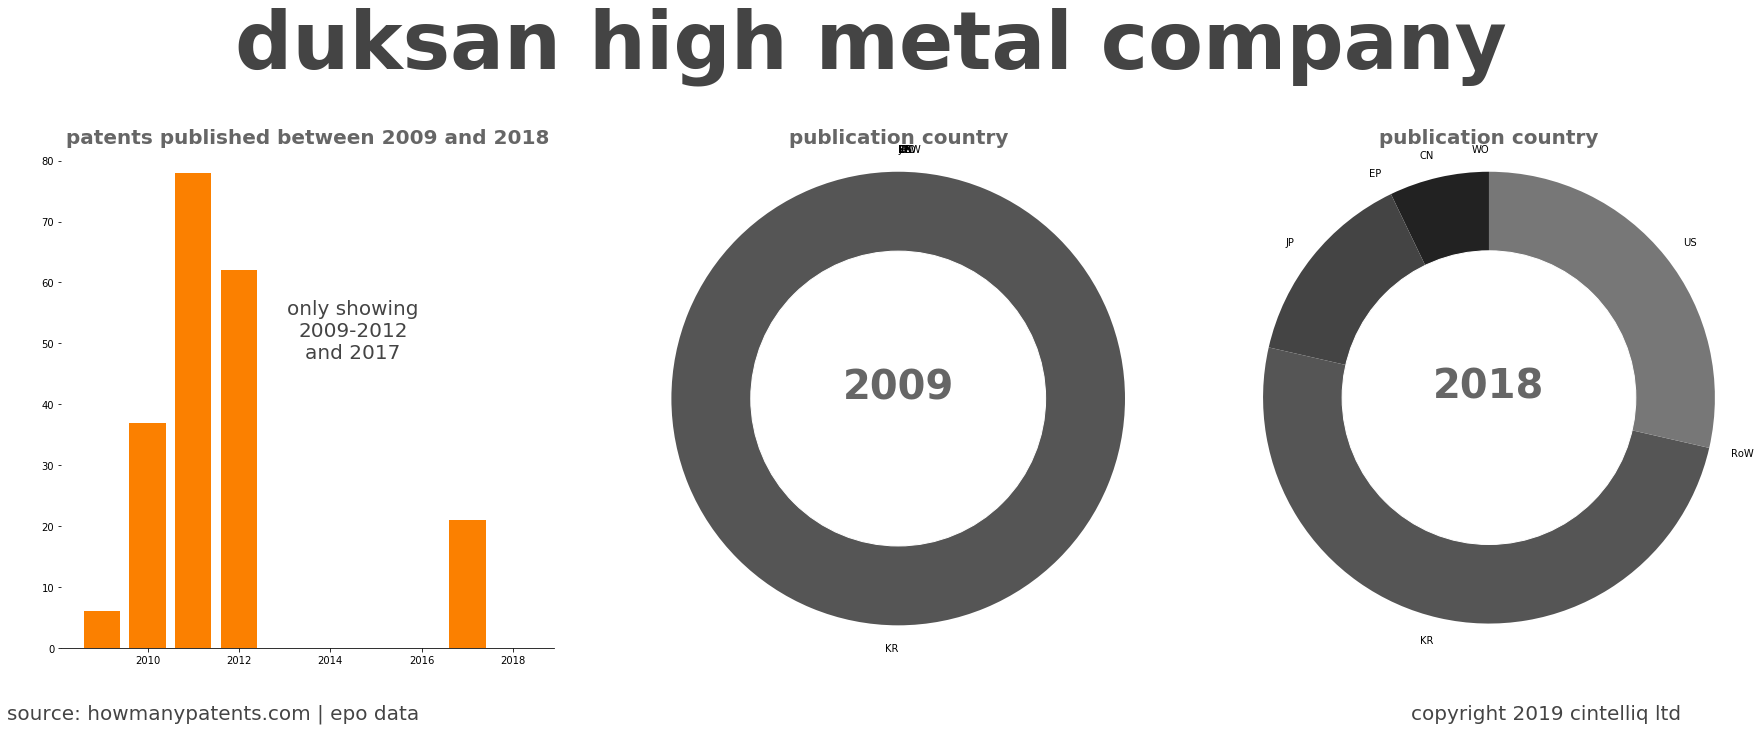 summary of patents for Duksan High Metal Company